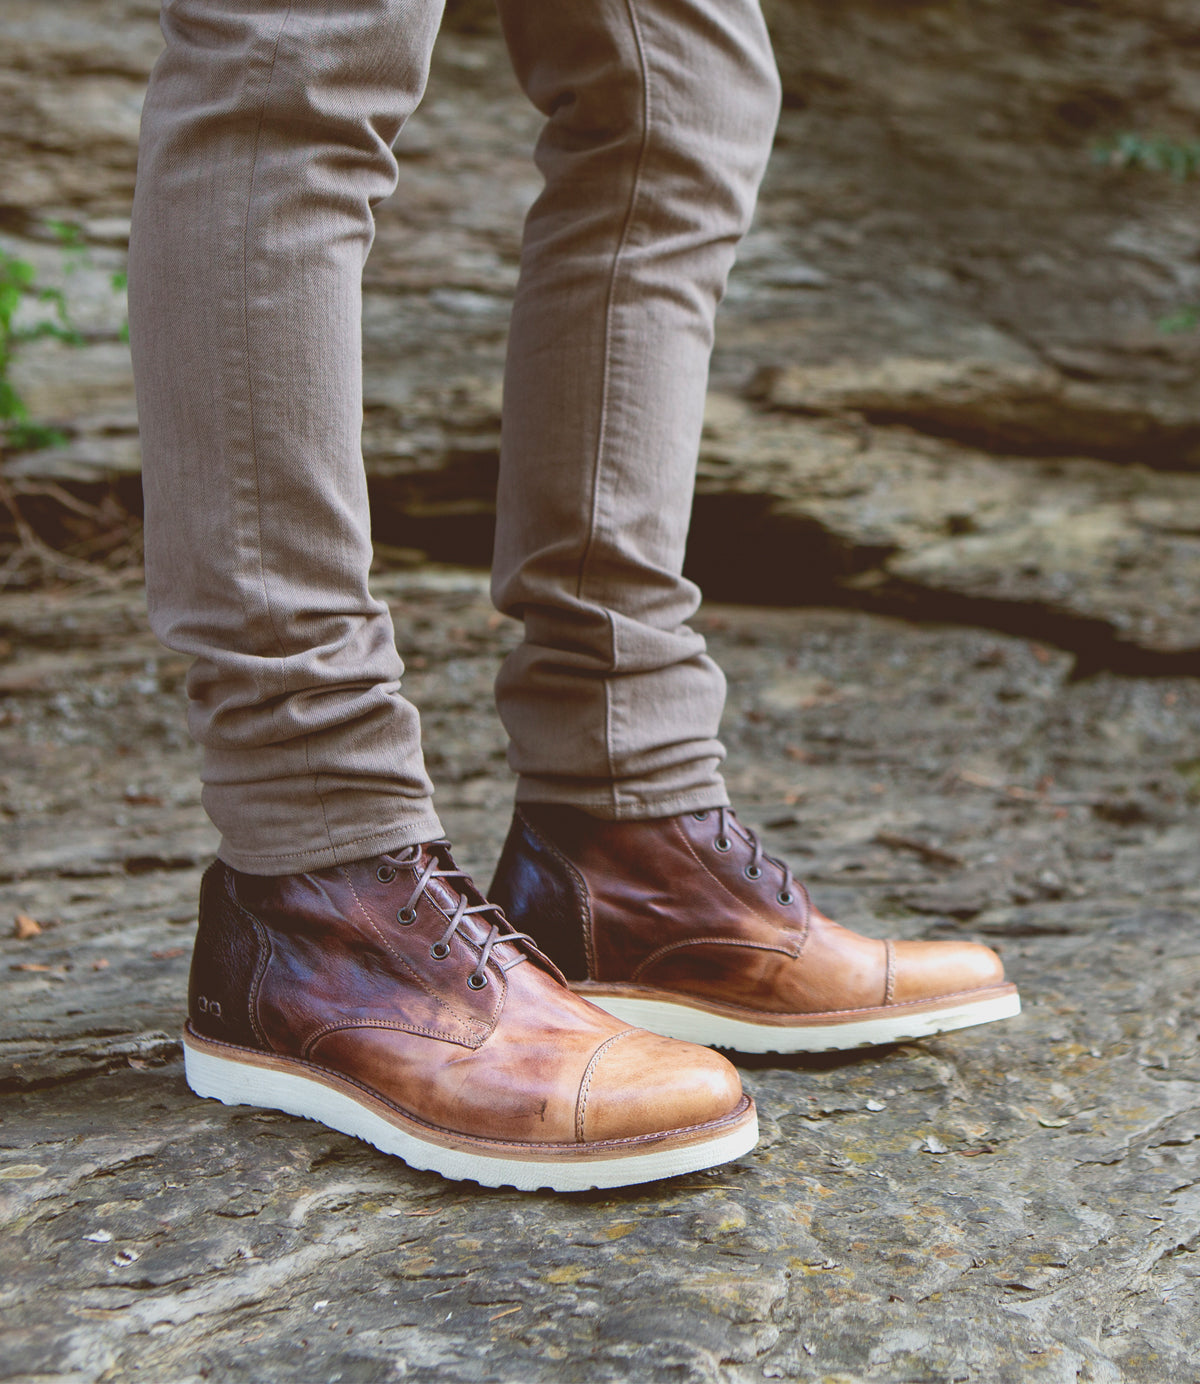 A person wearing Bed Stu men's leather boots and beige pants standing on a rocky surface.